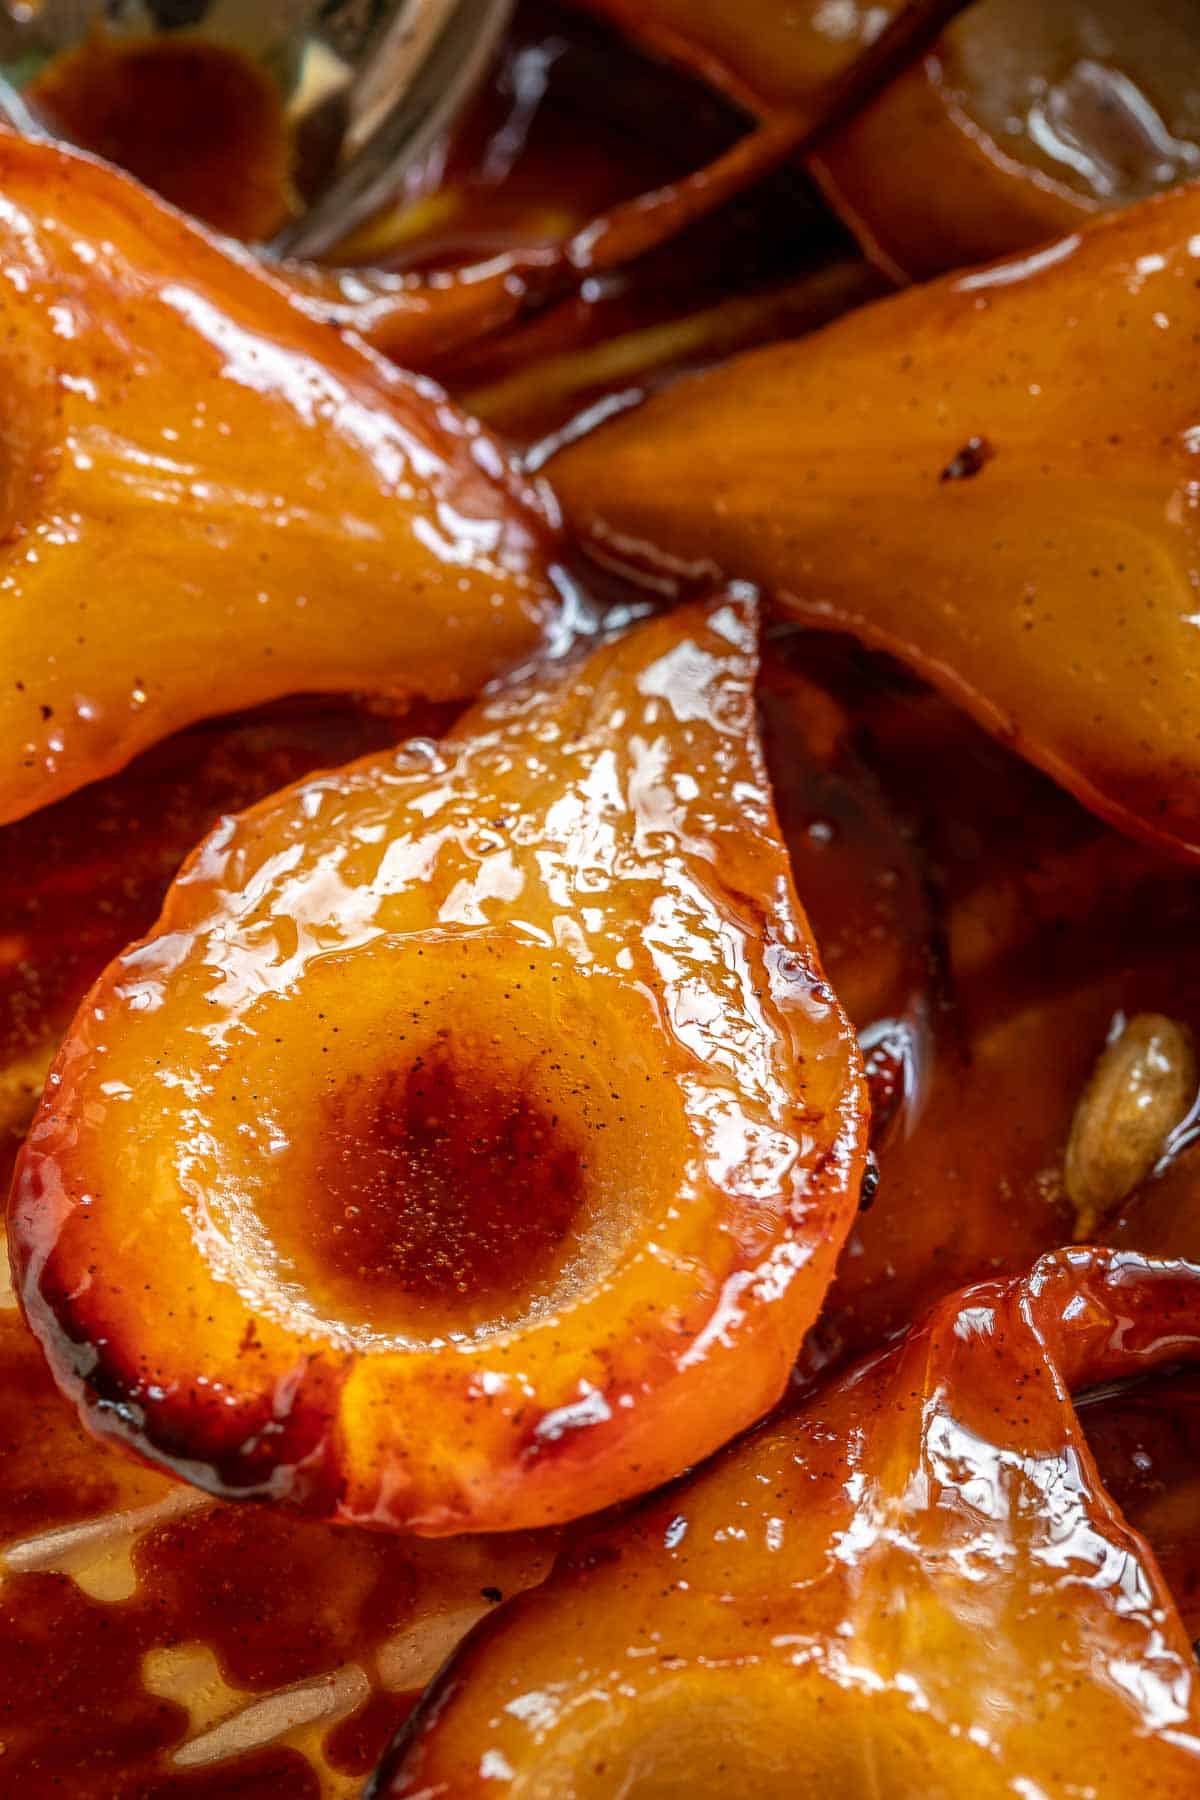 Caramelized pears in a dish, with caramel pooled around and in the pears, with vanilla beans speckled throughout.